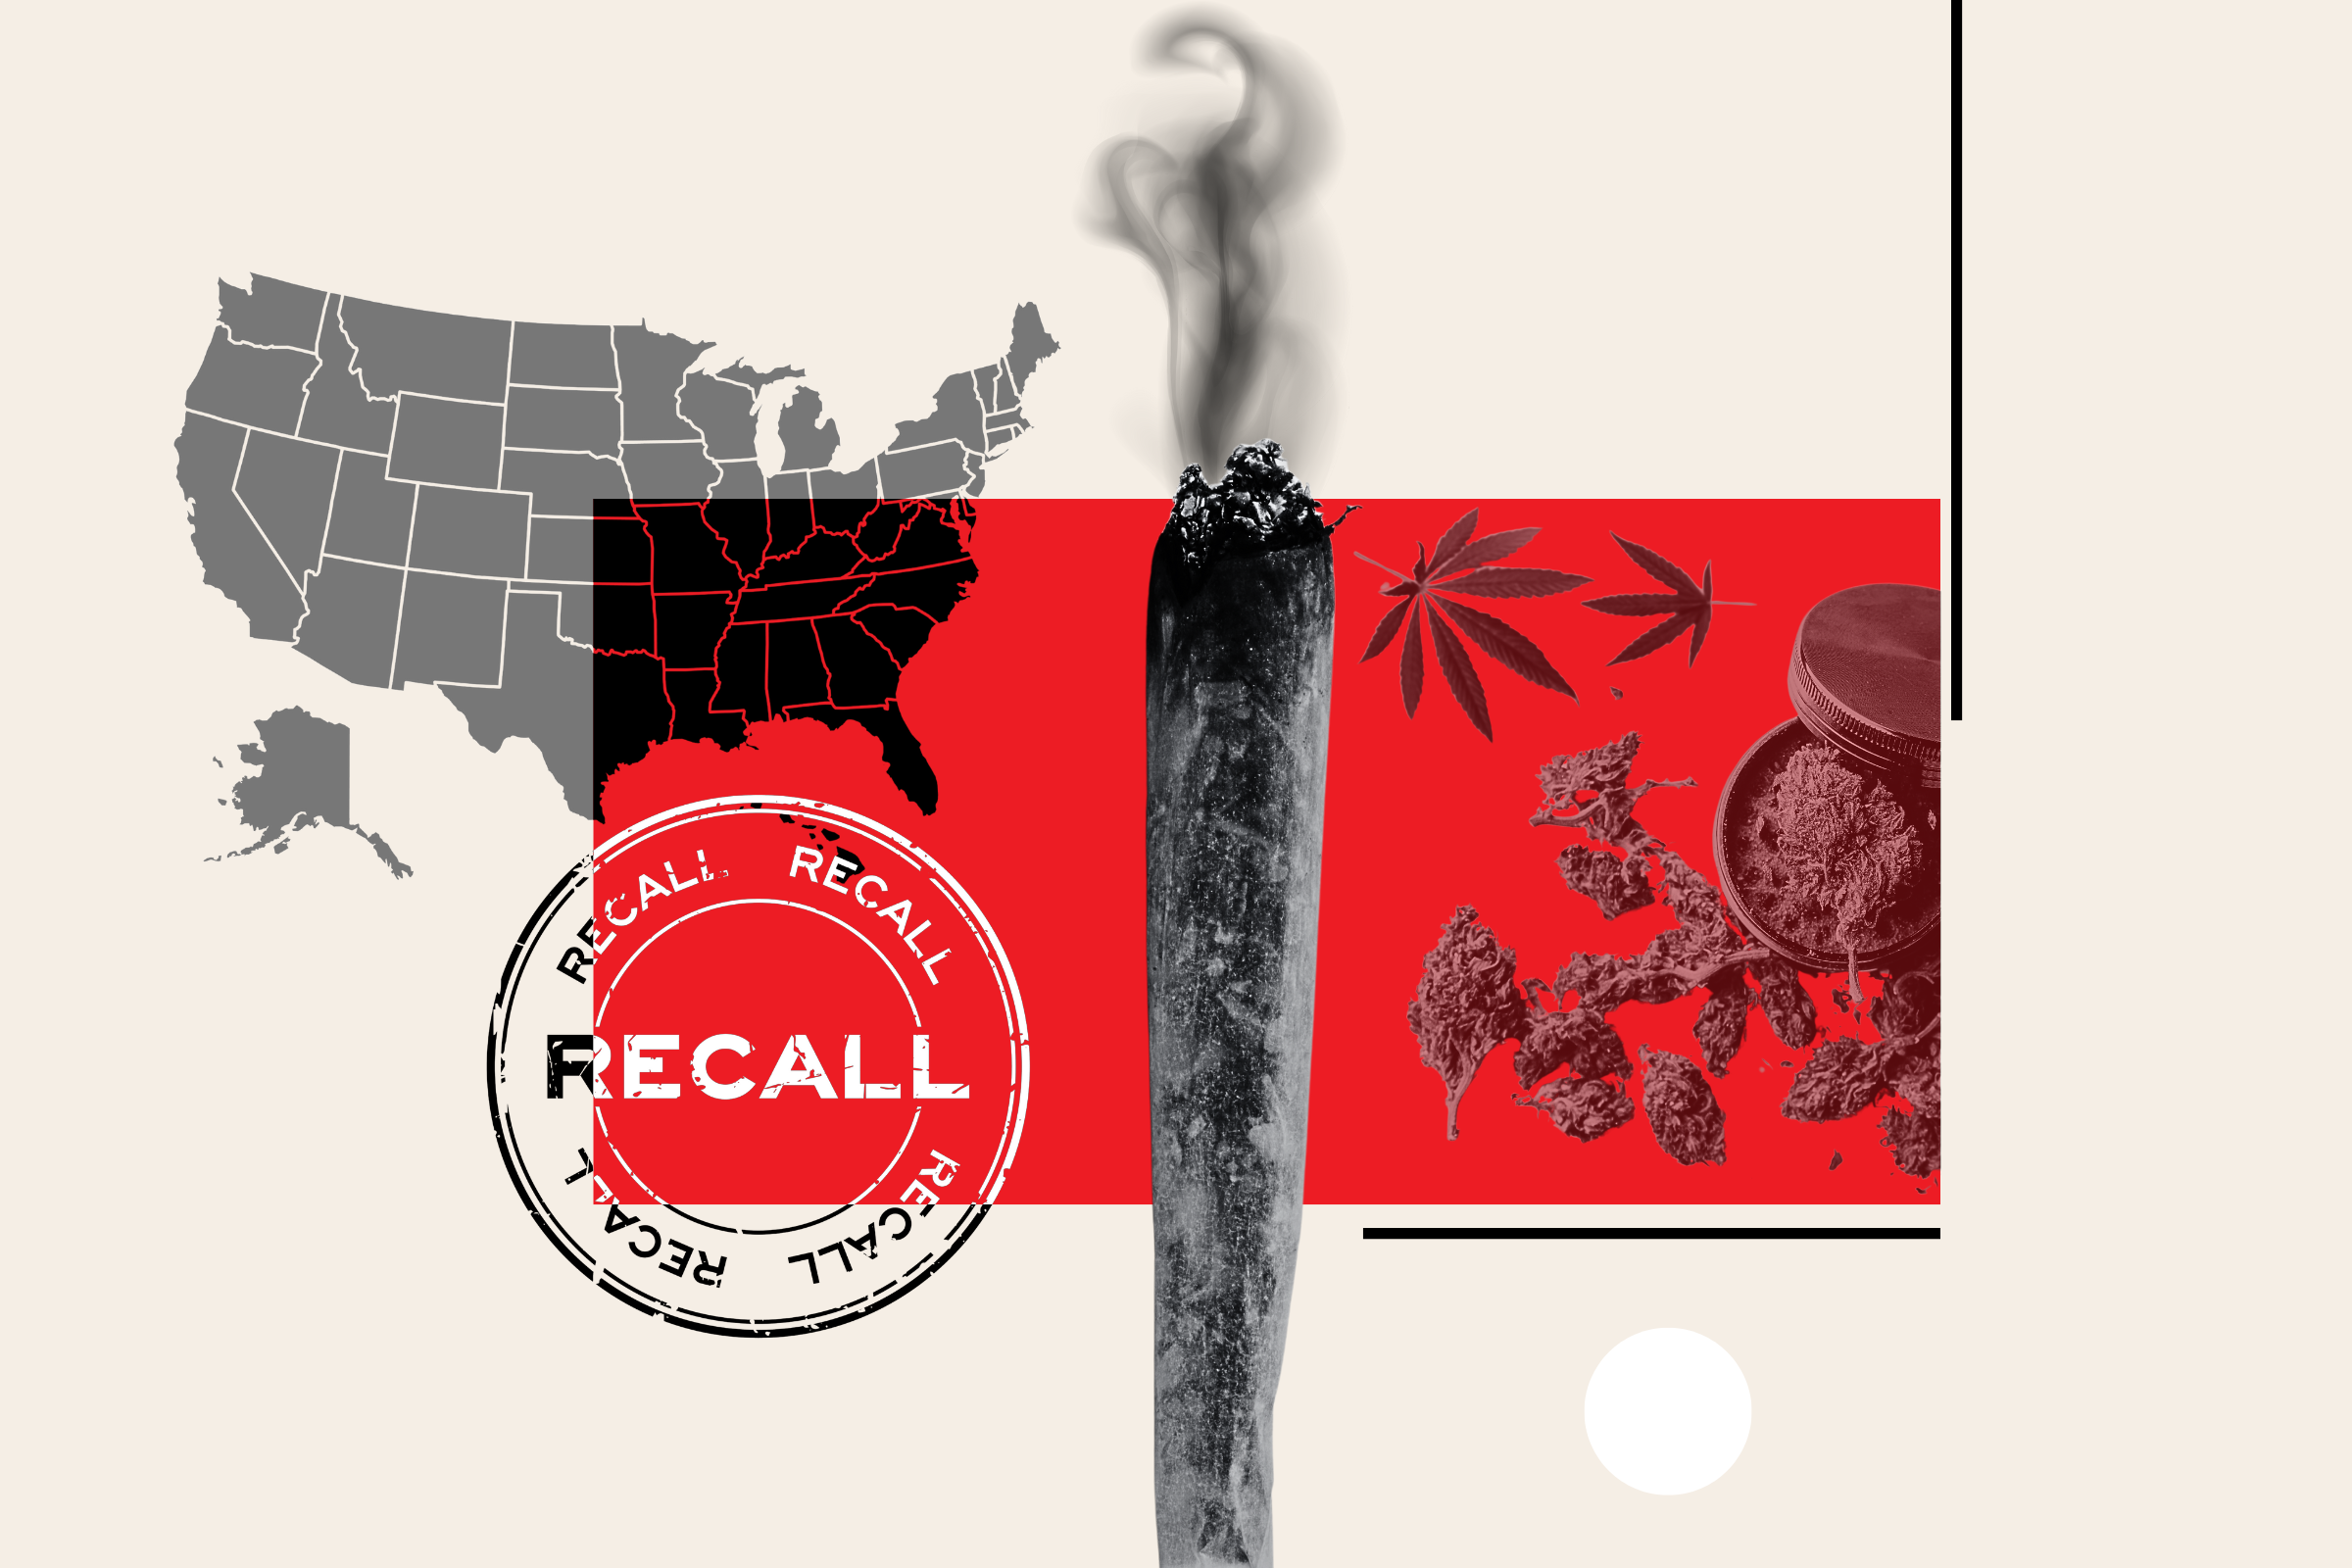 Weed recall map shows states where urgent warnings not to use issued